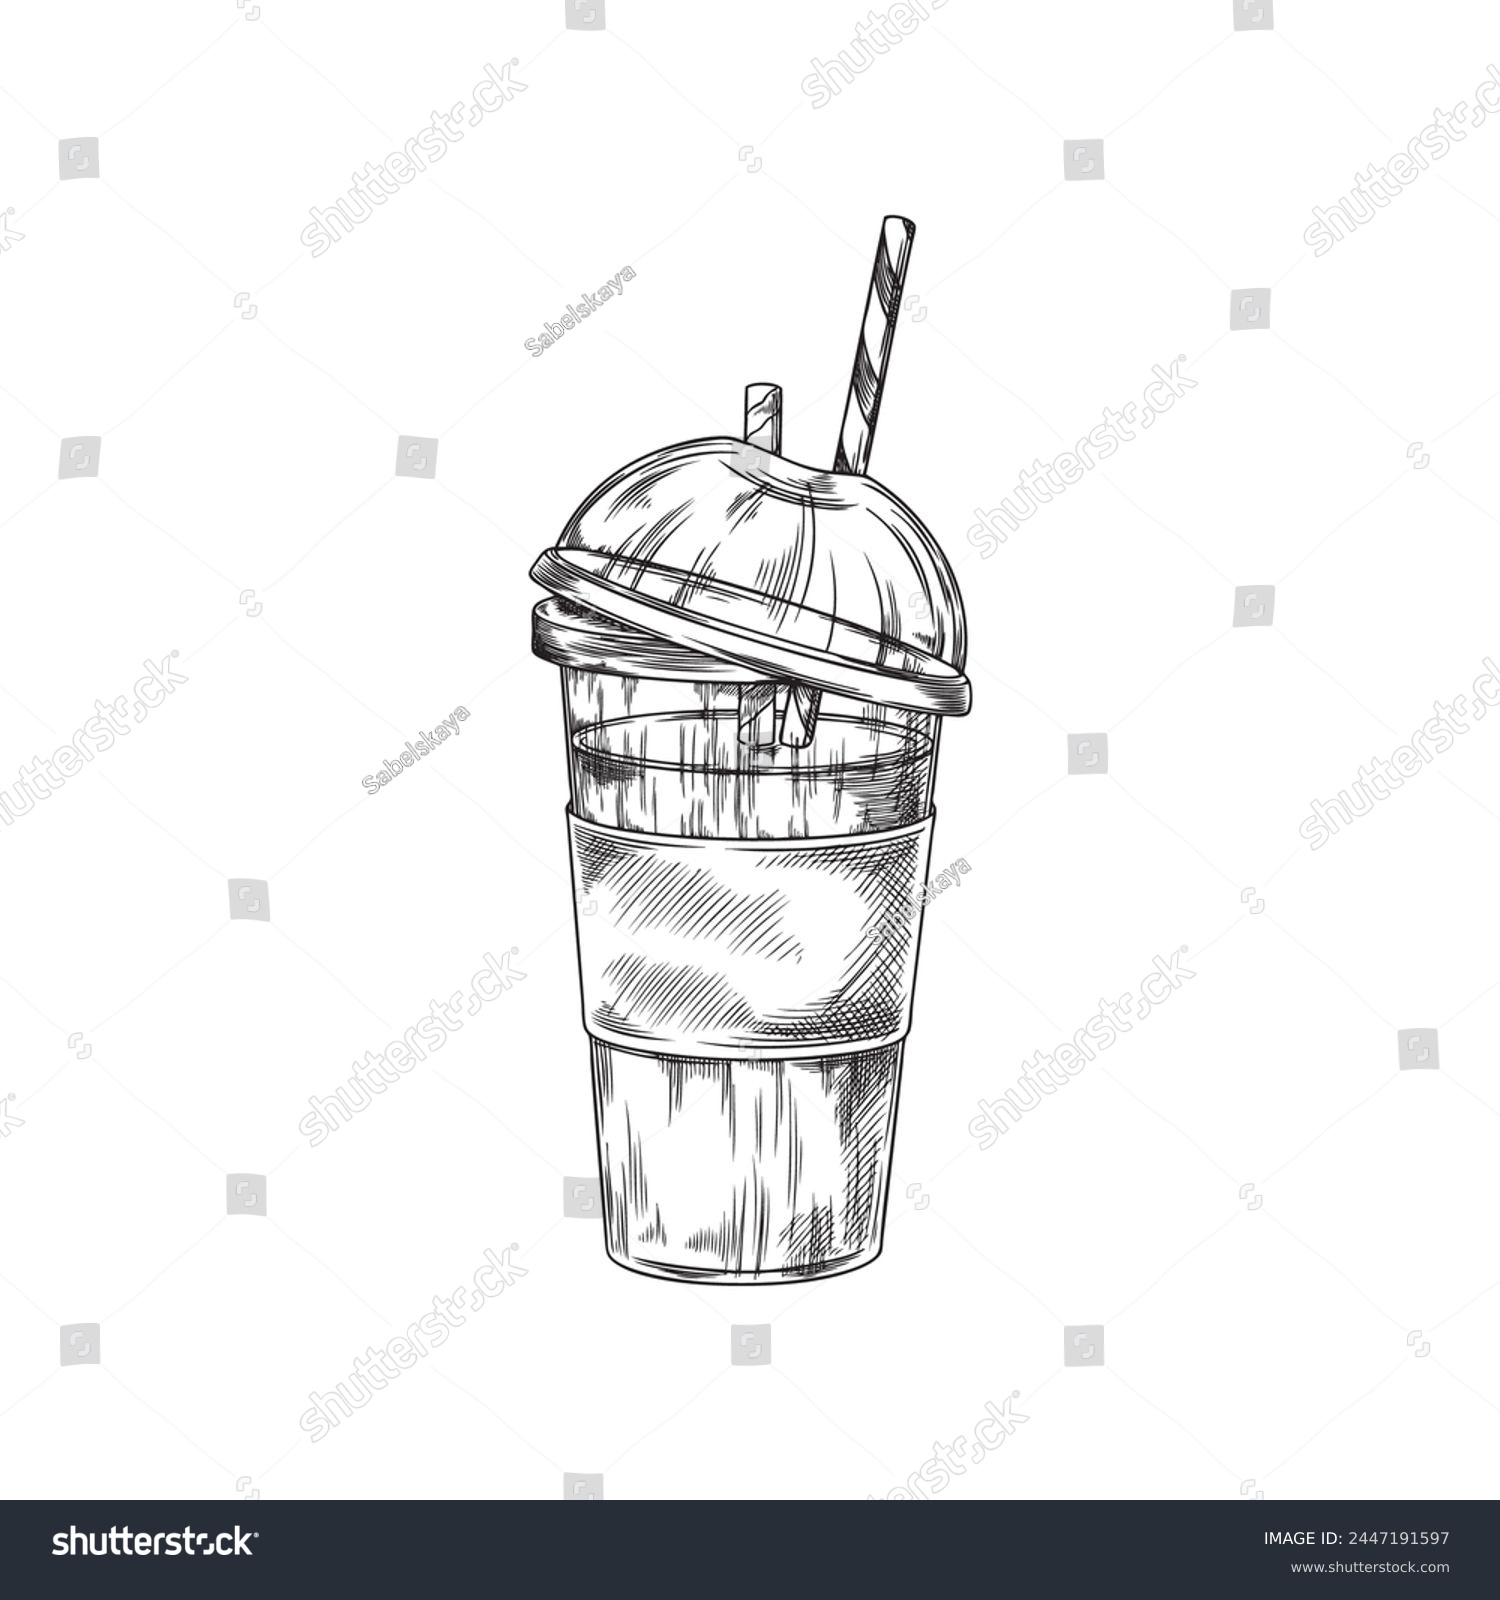 SVG of Vector illustration of a plastic smoothie glass and a cocktail stick on an isolated background in black and white style. Fresh drink for a healthy lifestyle, diet on hand drawn. svg